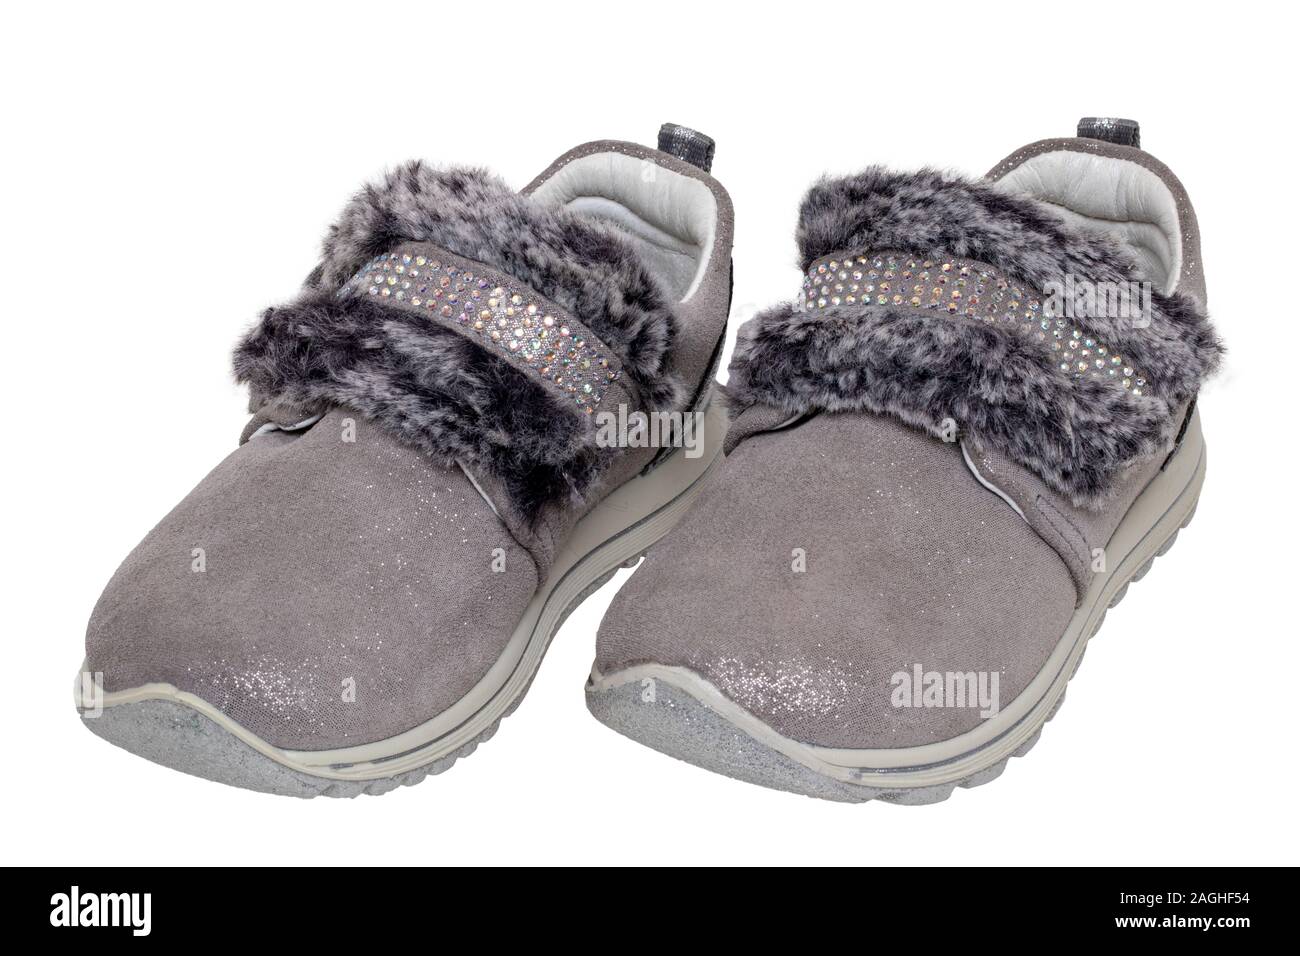 Child shoes fashion. Close-up of a pair beautiful gray silver suede sneaker or sports shoes for girls with fur and rhinestone decoration isolated on a Stock Photo